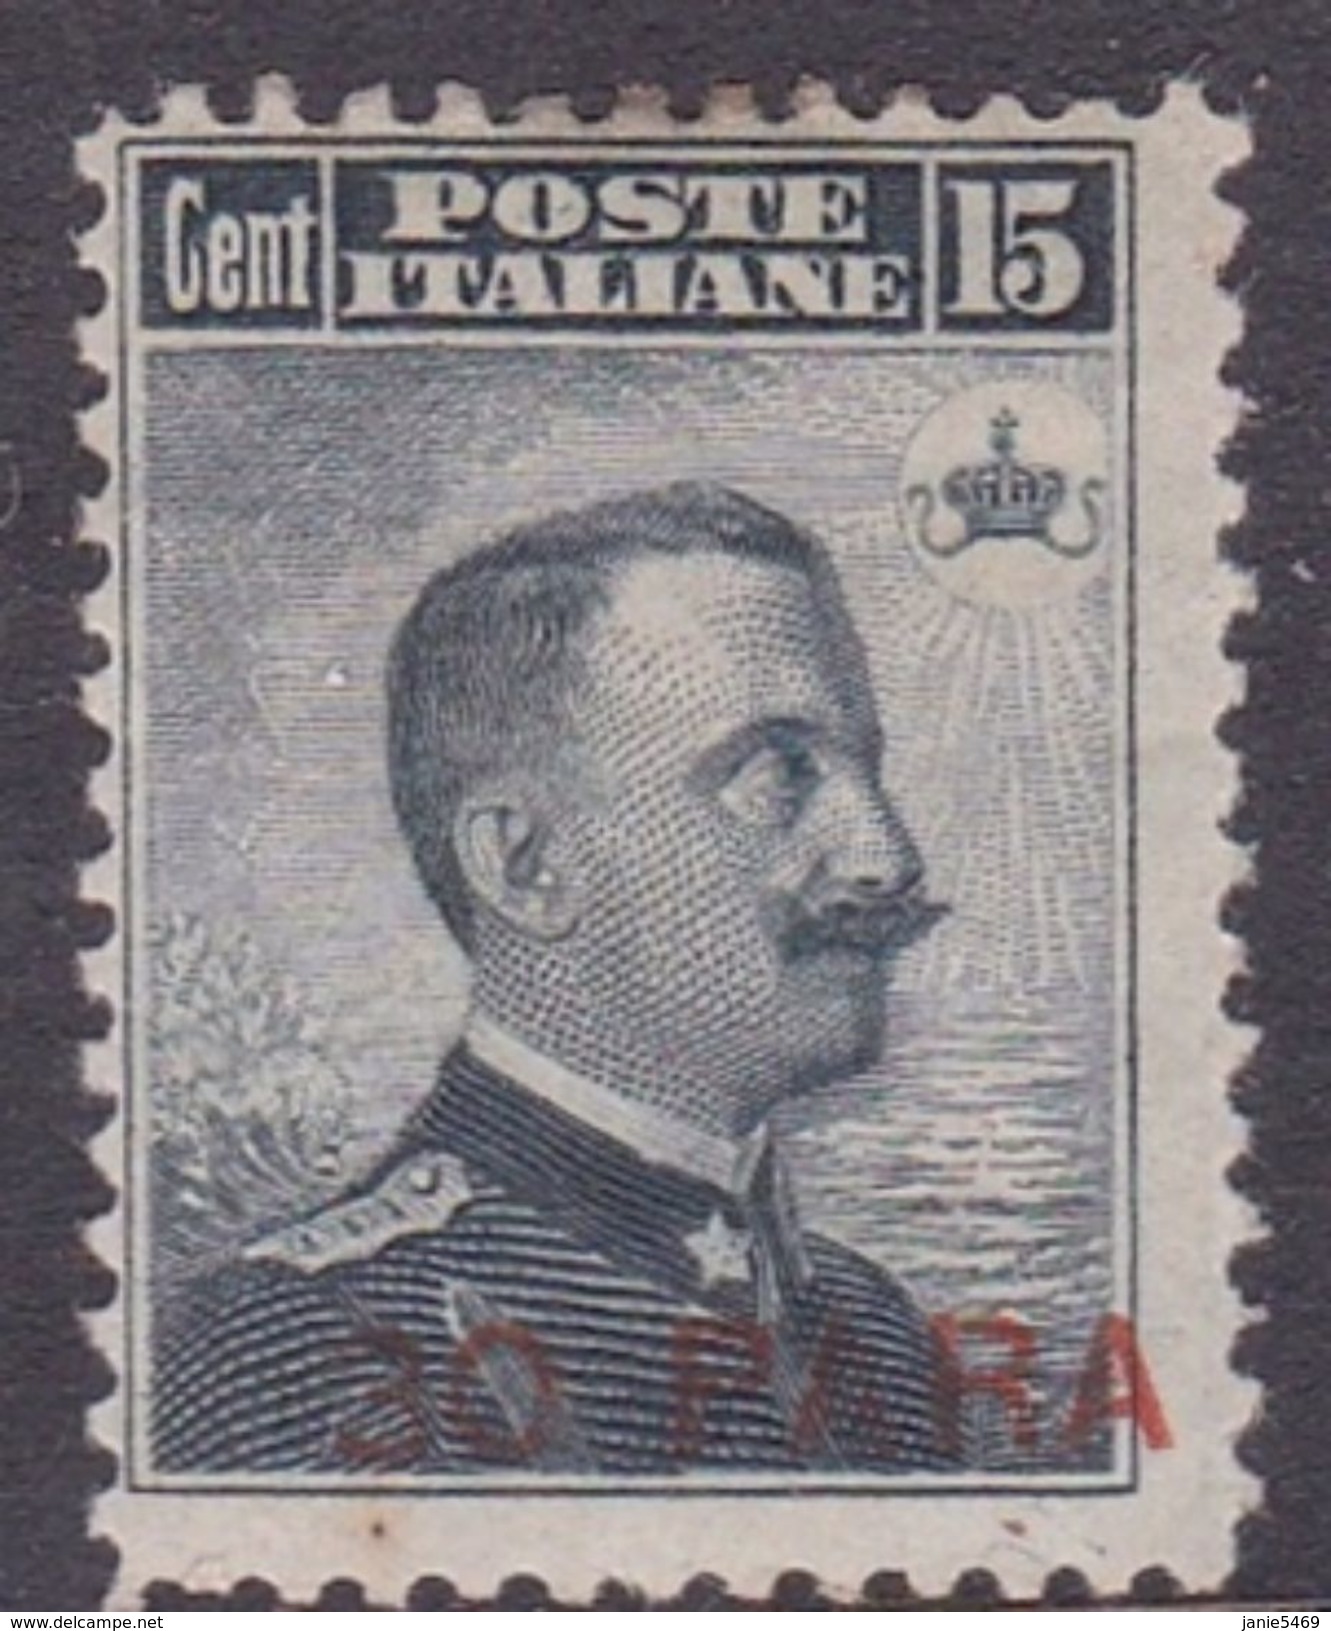 Italian Post Offices In The Levant, Costantinople S 15 1908 30 Para On 15c Grey, Mint Hinged - Algemene Uitgaven